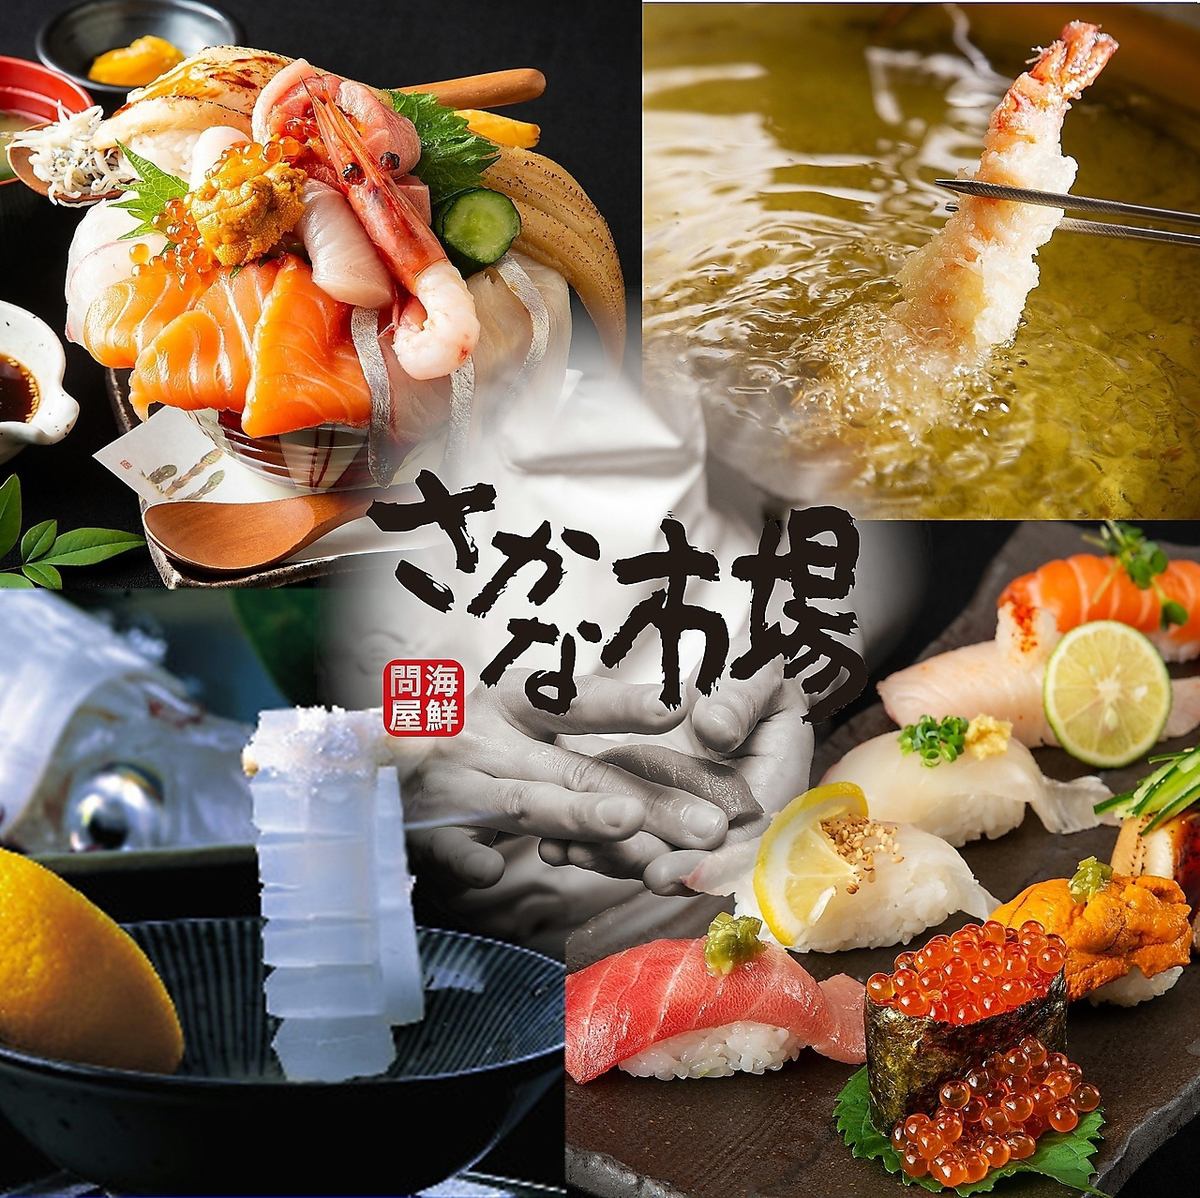 Freshly caught! The famous "live squid figure making" and live fish sashimi are delicious!